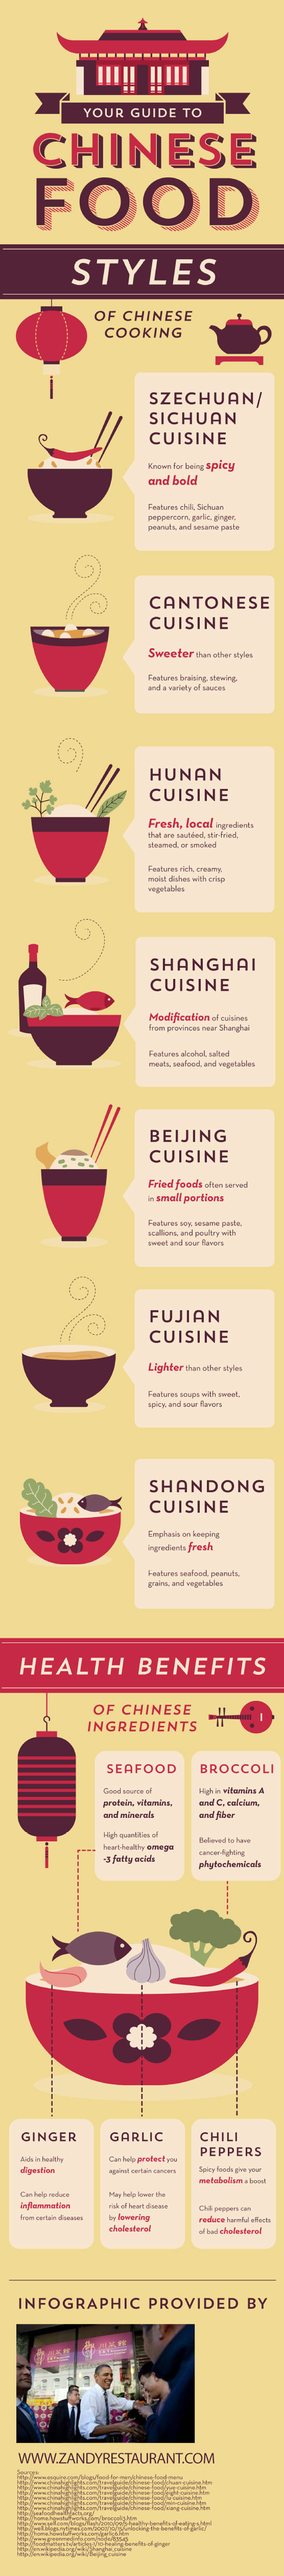 chinese food styles guide infographic